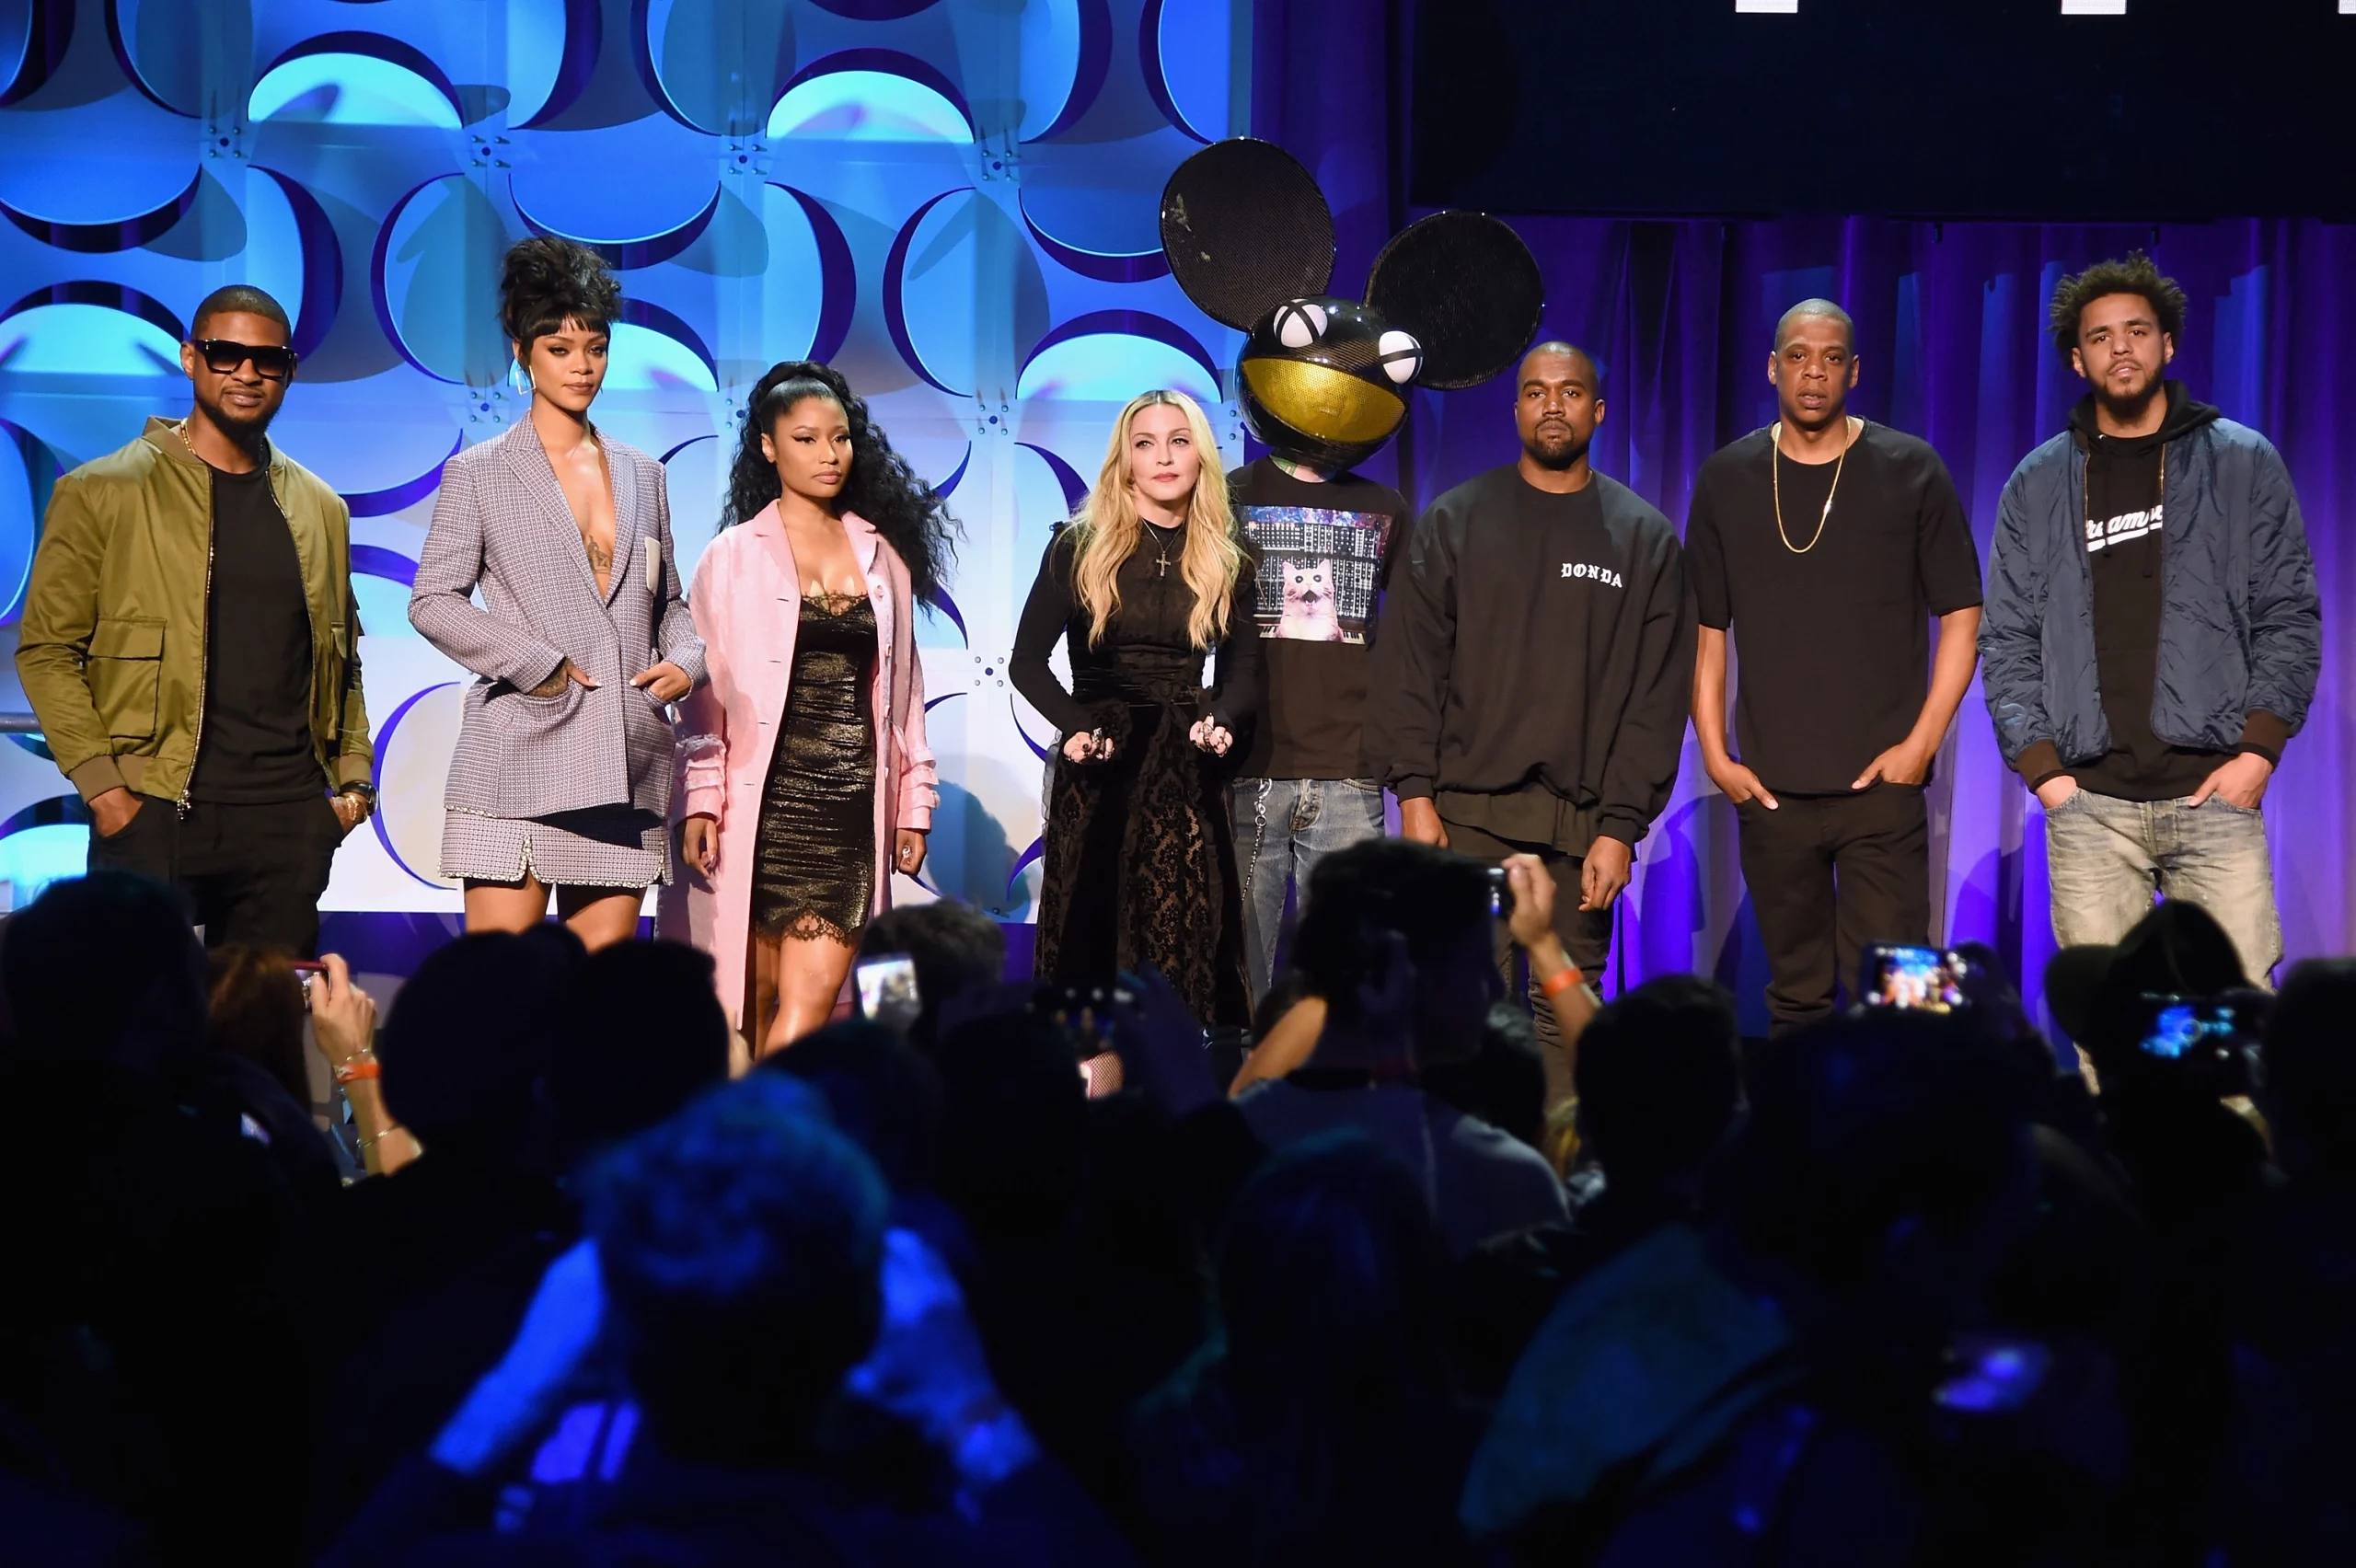 The 2015 Tidal launch event dubbed as an Illuminati conference